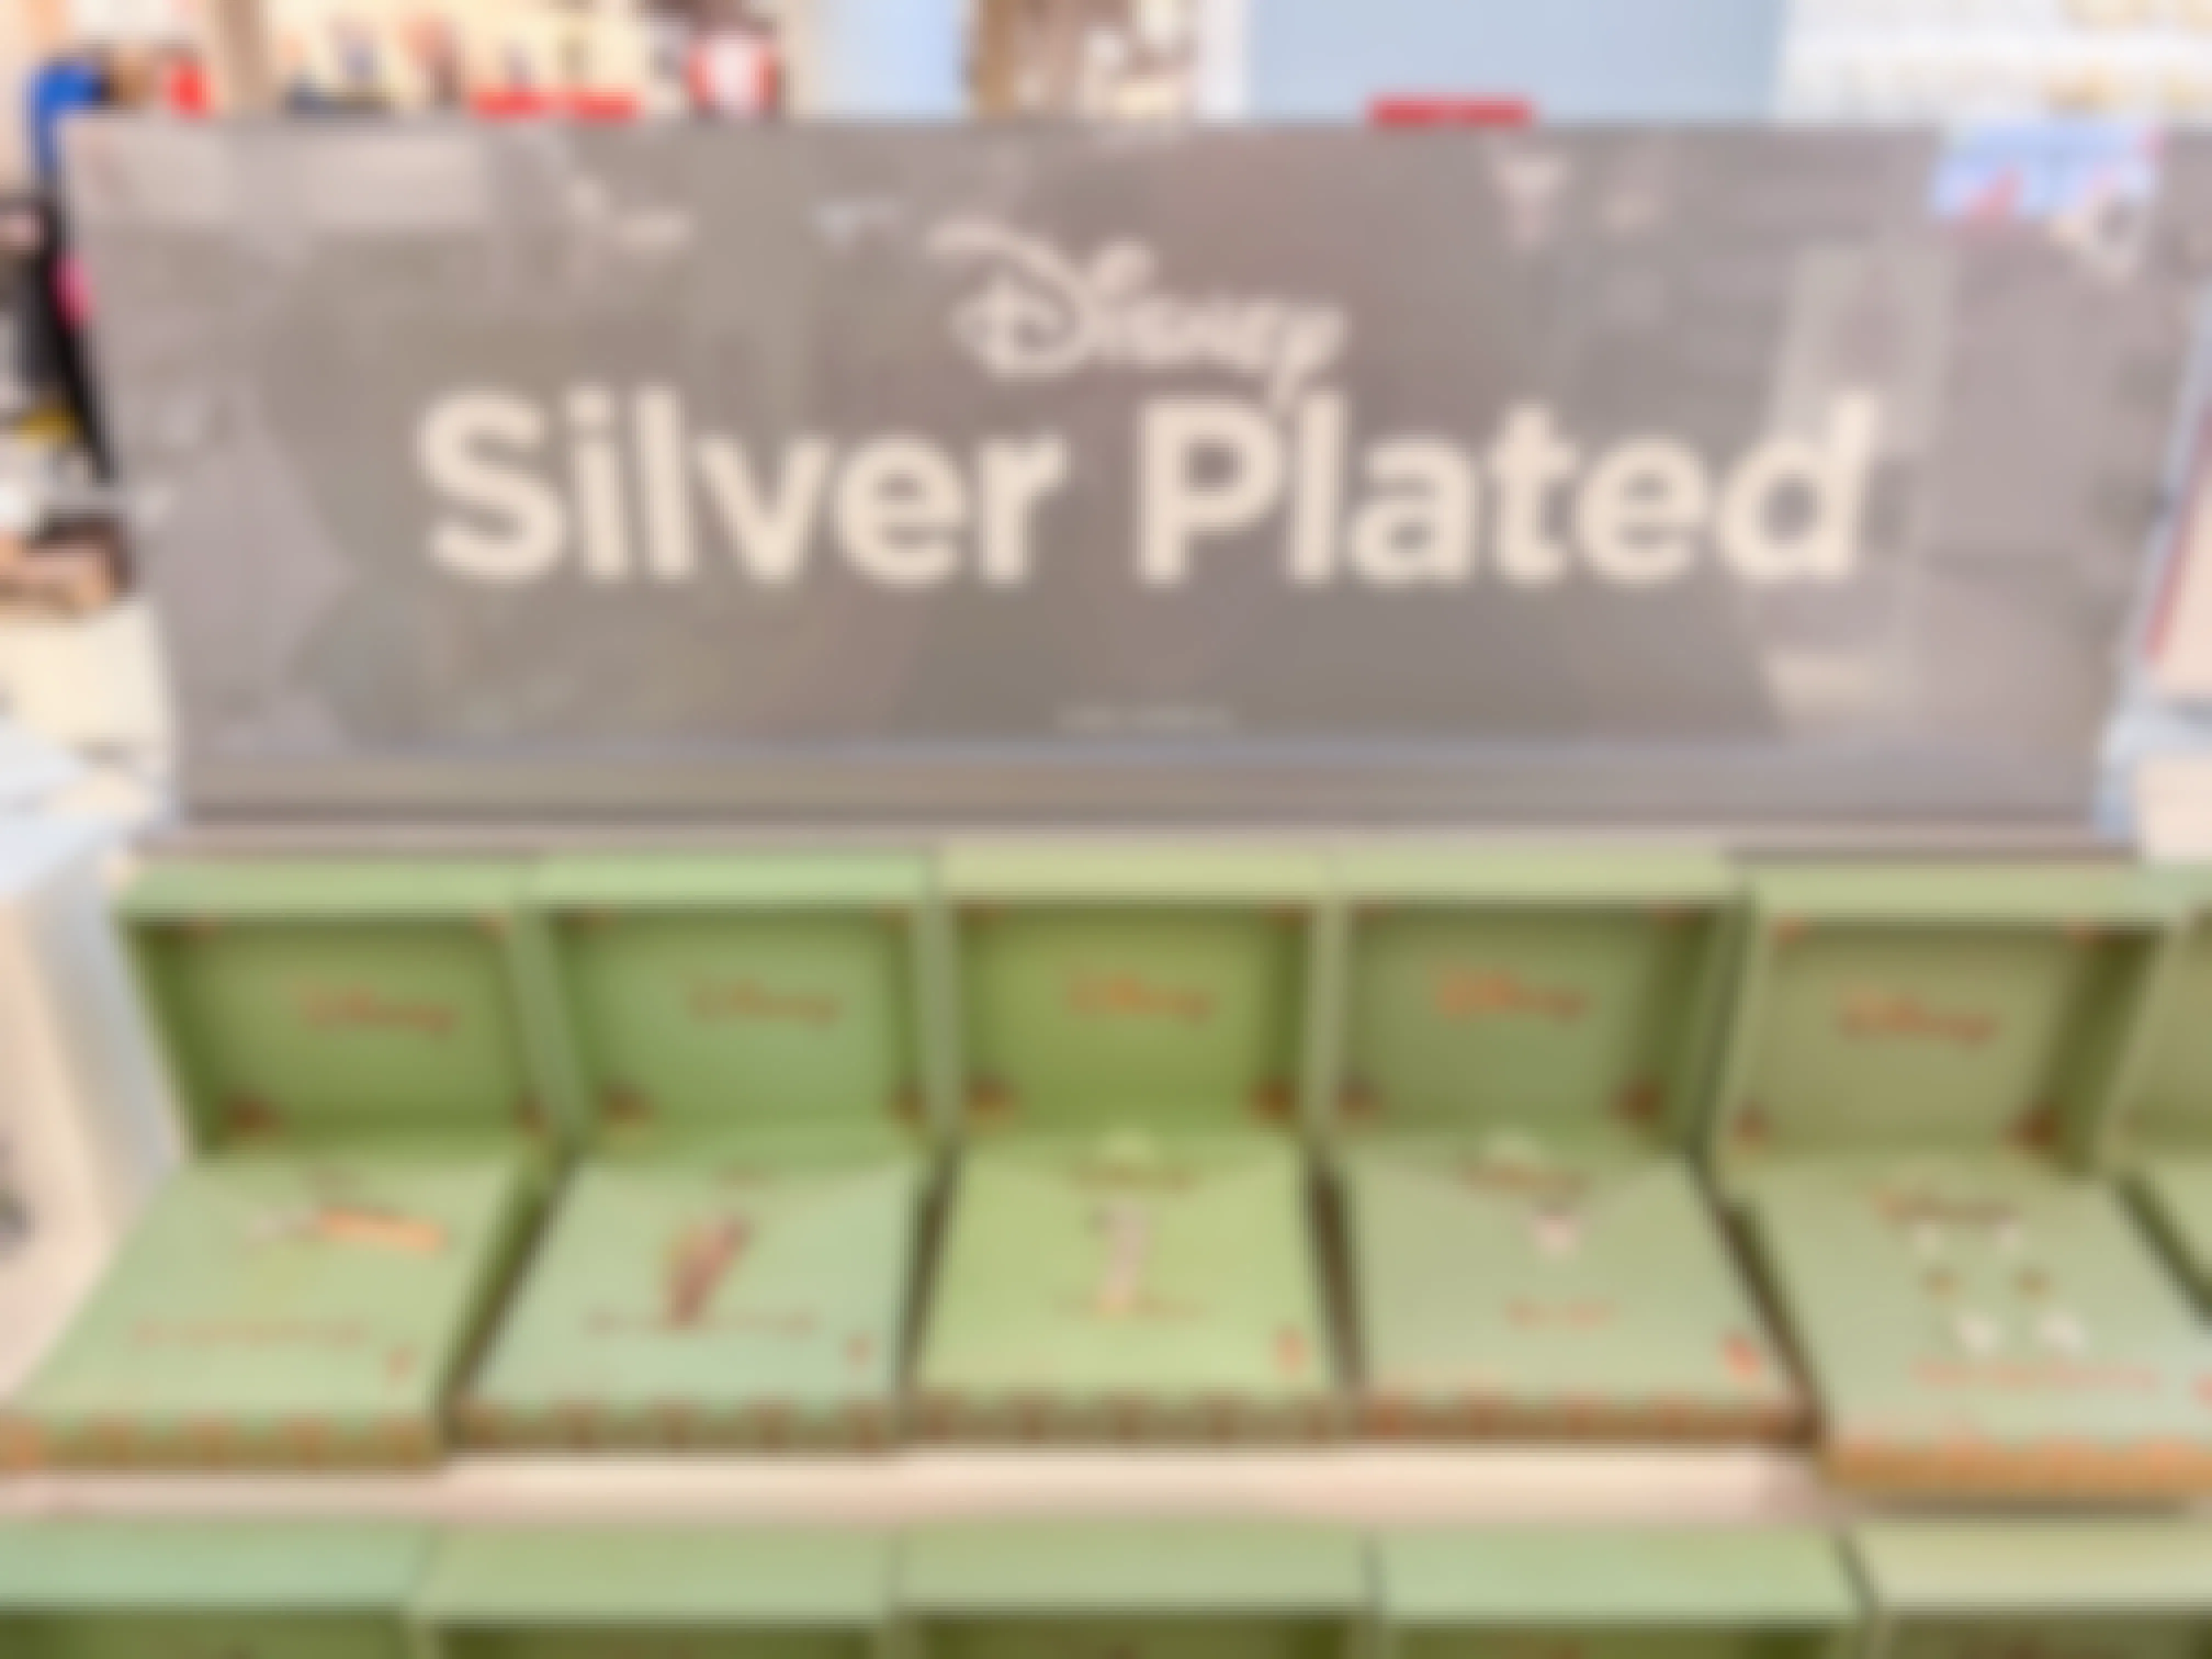 Disney Silver plated boxed jewelry